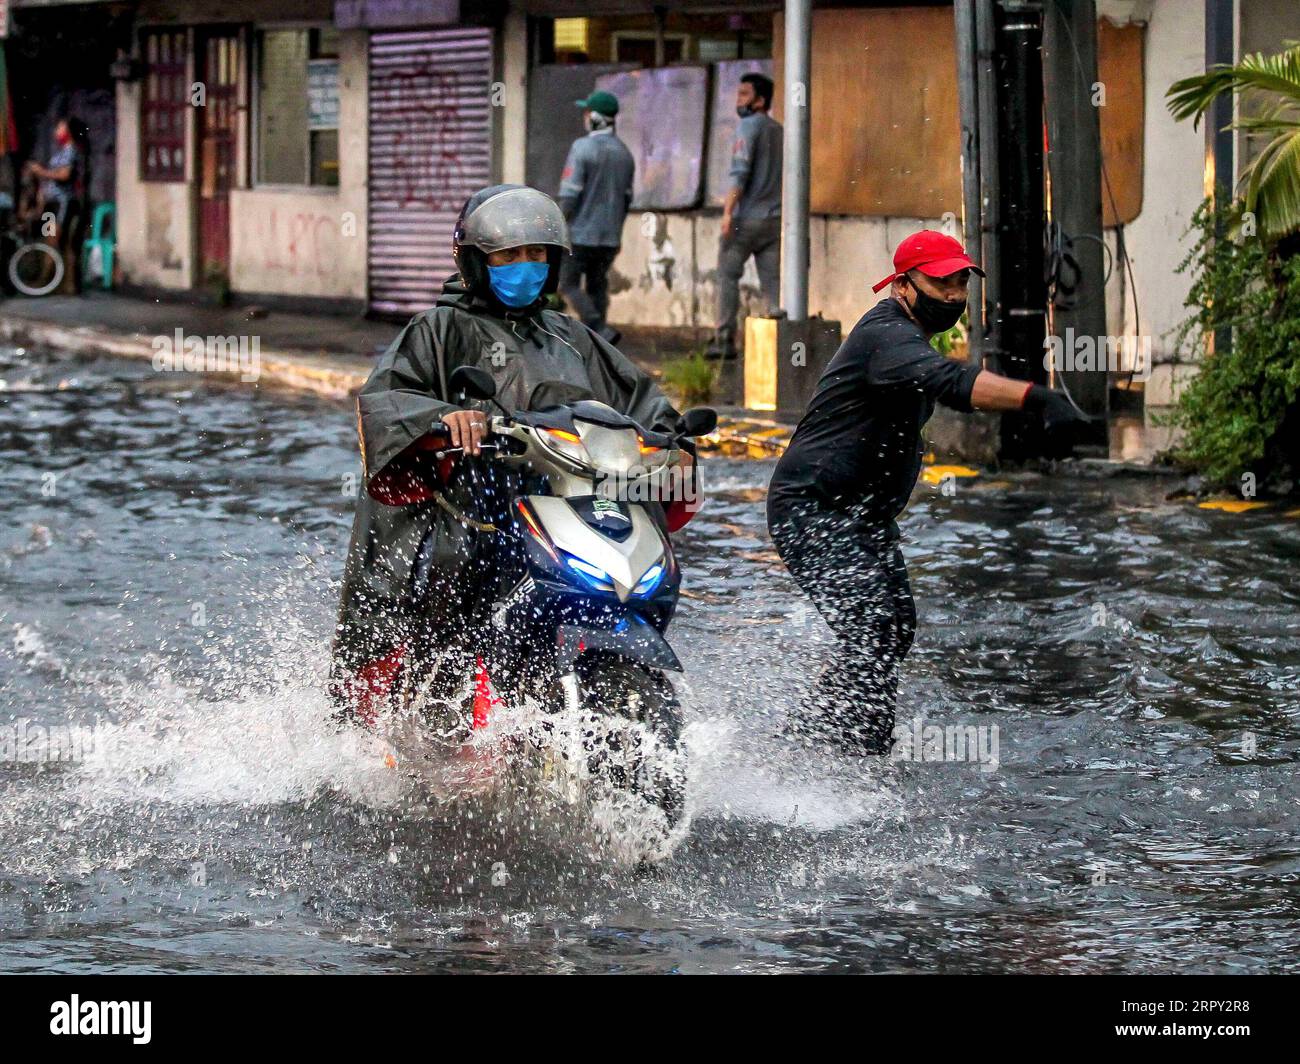 200611 -- MANILA, June 11, 2020 -- A man rides his motorbike through a flooded area caused by the heavy rain from the tropical depression locally named Butchoy in Manila, the Philippines, on June 11, 2020.  PHILIPPINES-MANILA-TROPICAL DEPRESSION BUTCHOY ROUELLExUMALI PUBLICATIONxNOTxINxCHN Stock Photo